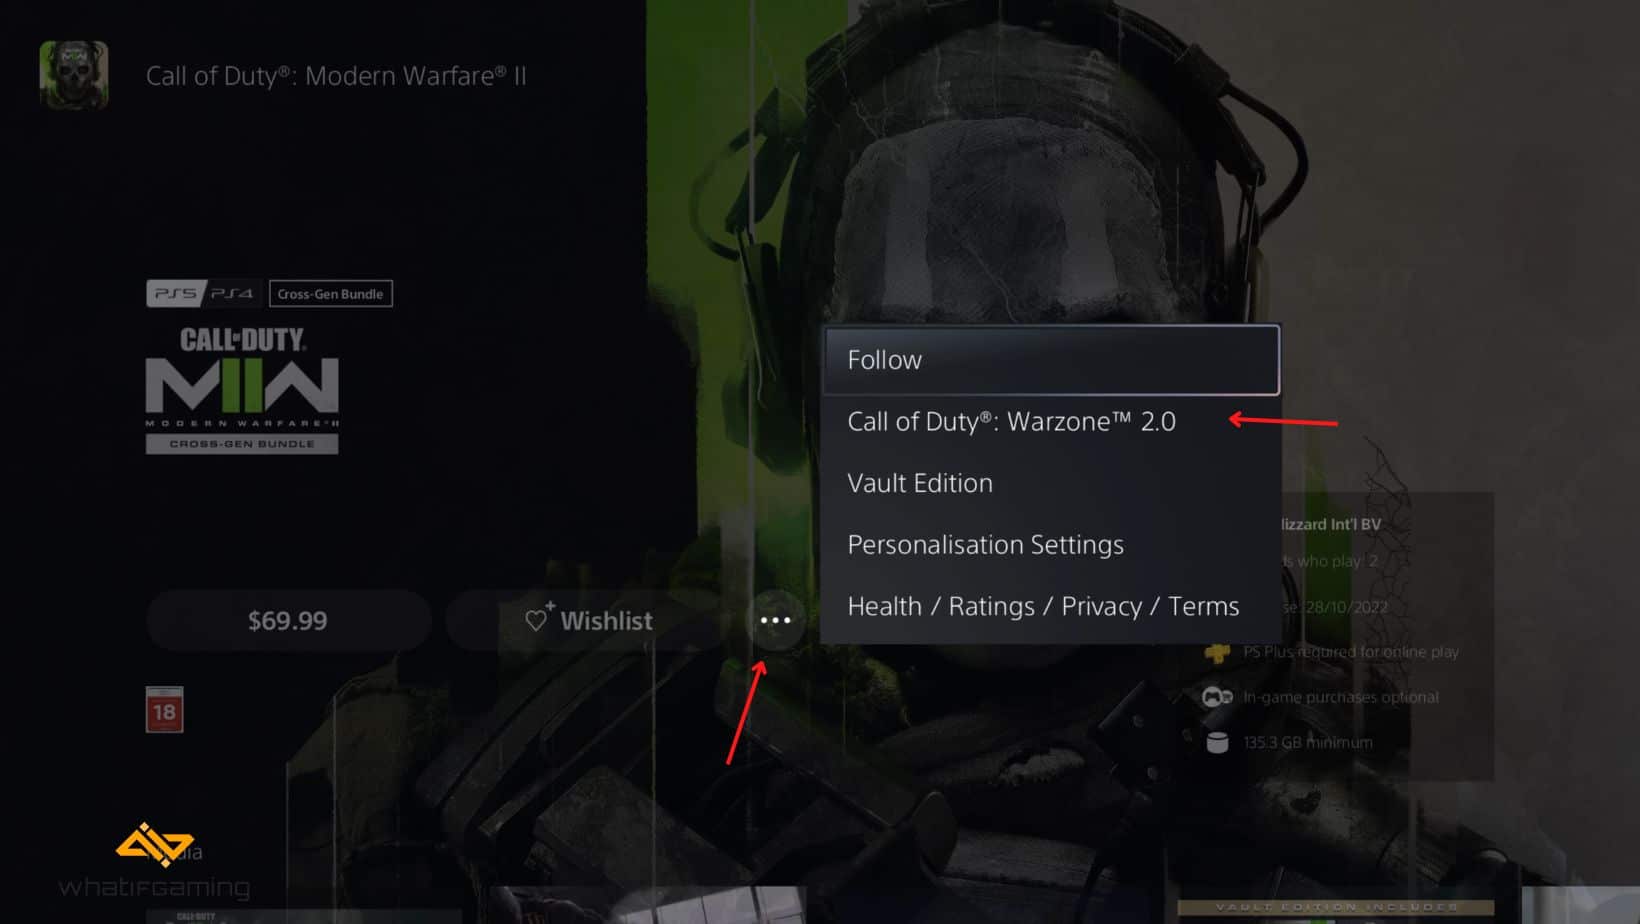 Choose Warzone 2.0 from the settings